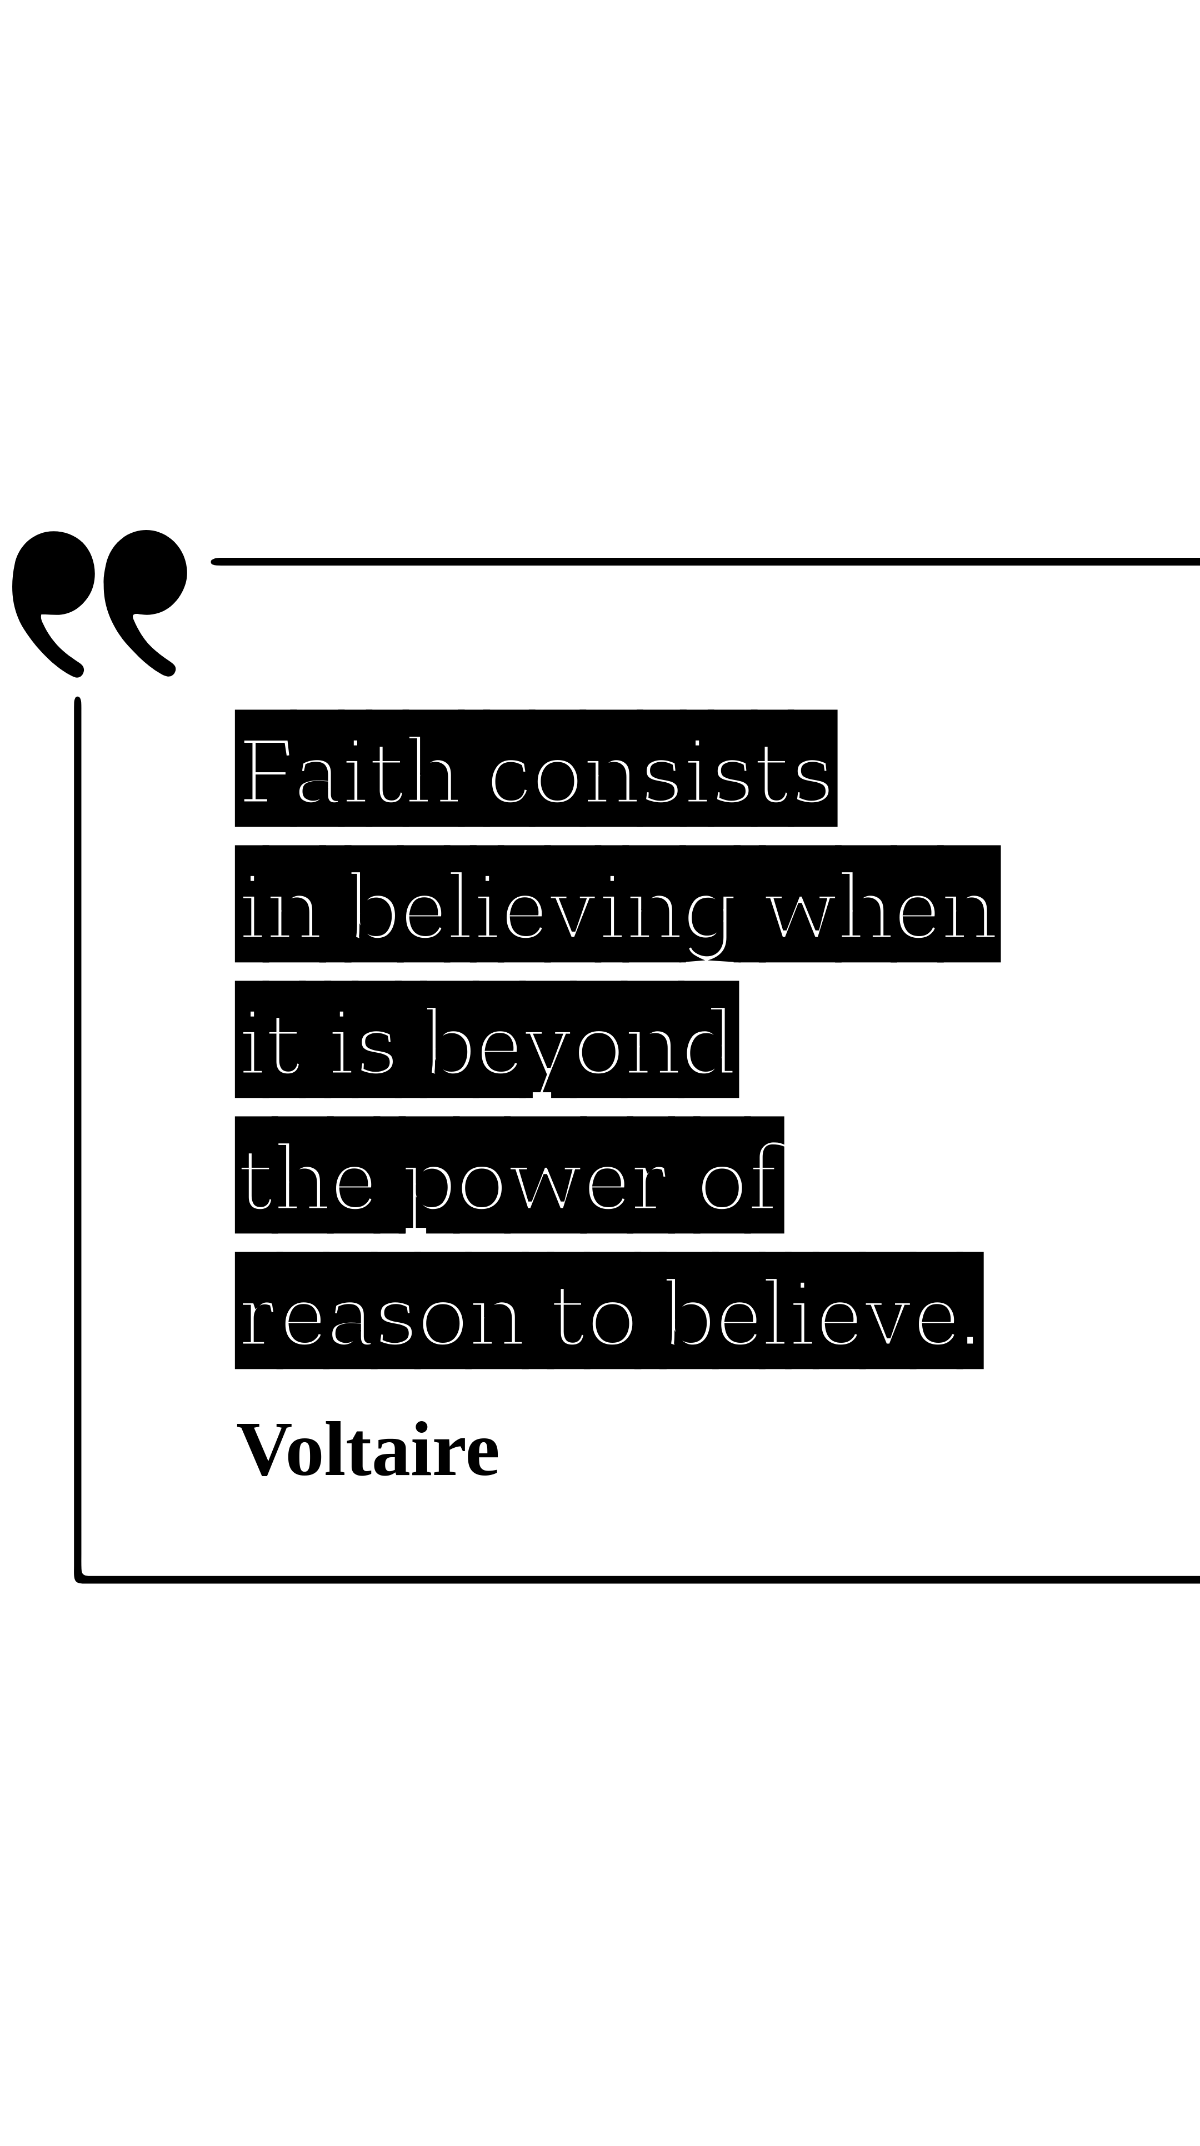 Free Voltaire - Faith consists in believing when it is beyond the power of reason to believe. Template